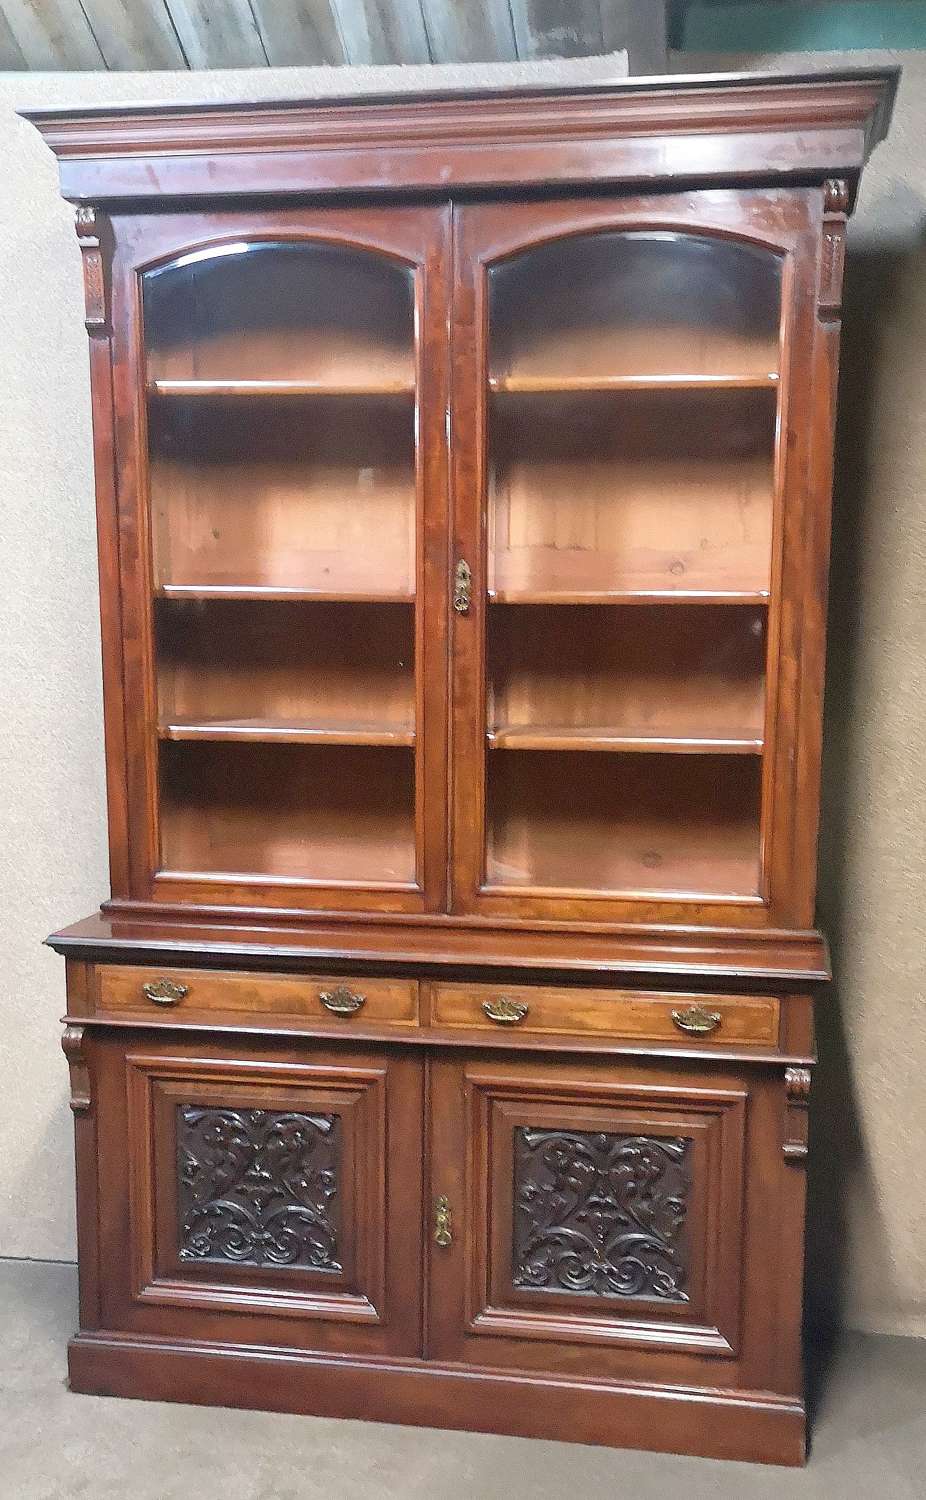 Victorian Mahogany Two Door Bookcase - Carved Decoration